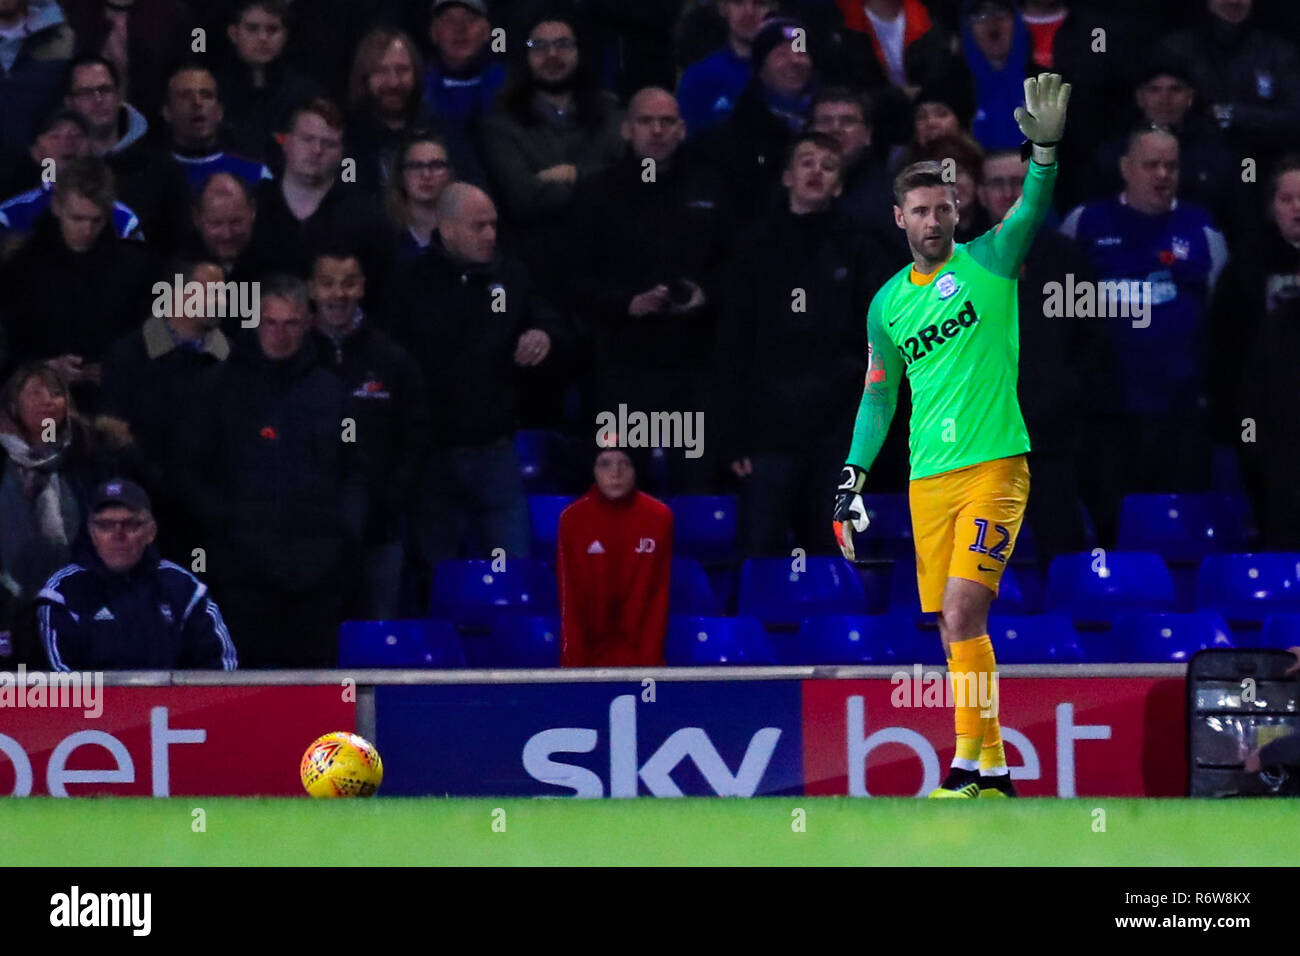 3rd November 2018, Portman Road, Ipswich, England; Sky Bet Championship Preston North End  ; Paul Gallagher (12) of Preston acts as stand in goalkeeper after Chris Maxwell is sent off.  Credit: Georgie Kerr/News Images,  English Football League images are subject to DataCo Licence Stock Photo